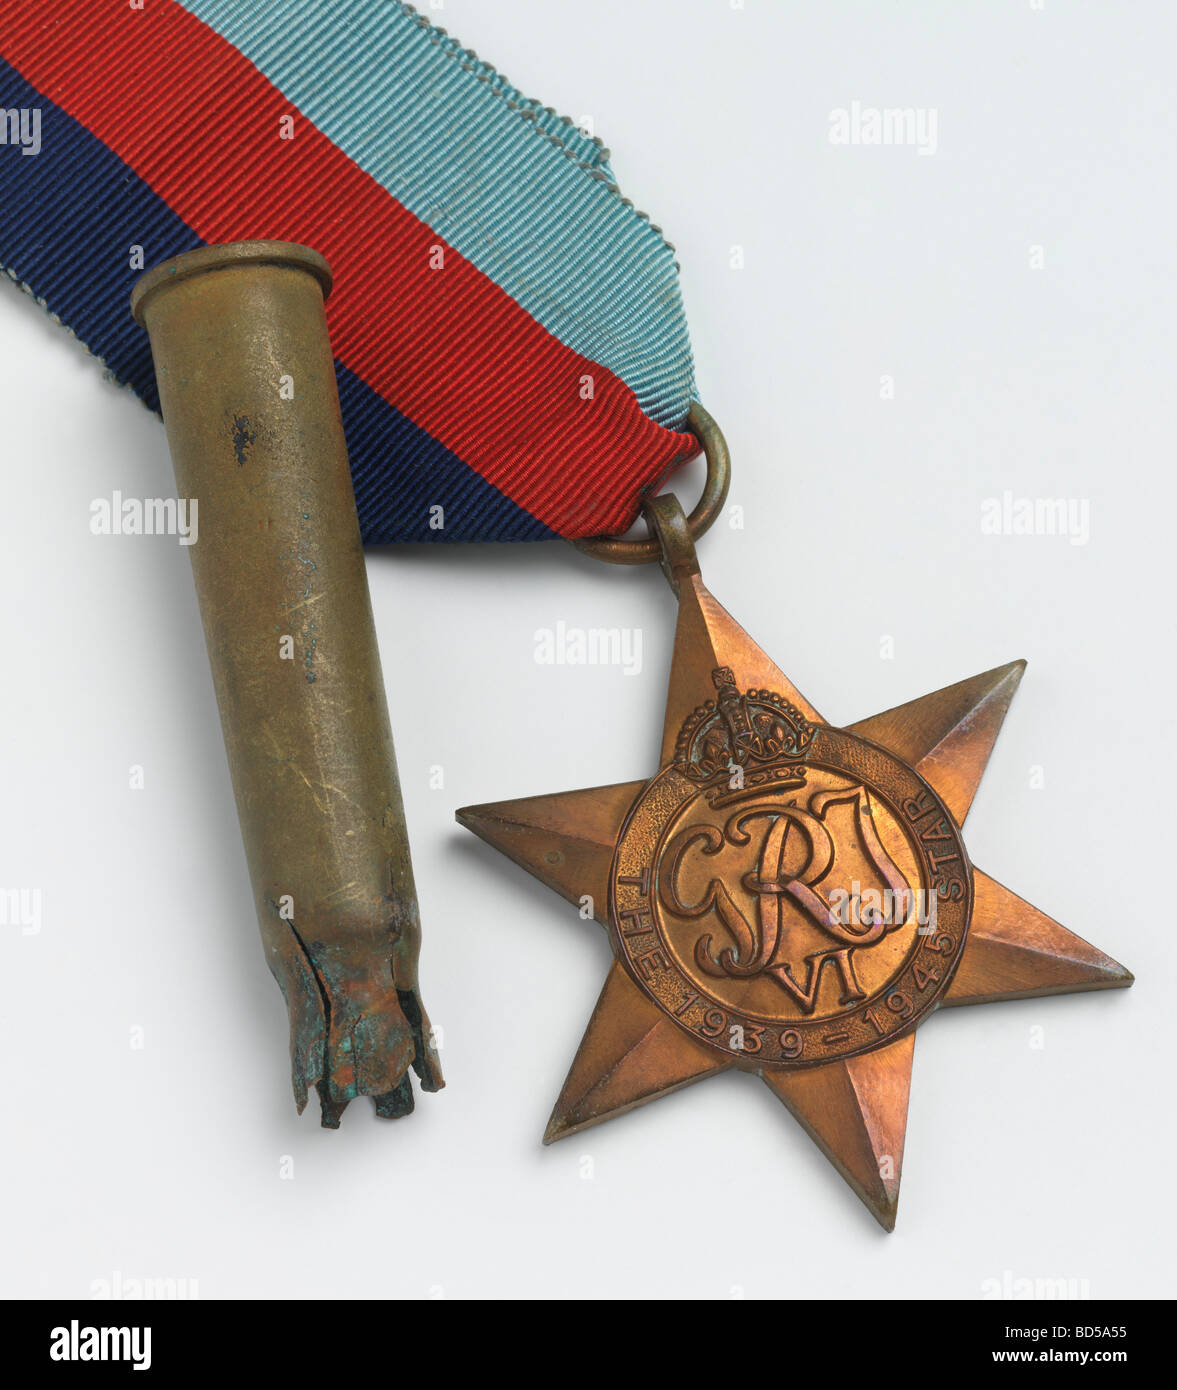 War, a British campaign medal and an expended 303 rifle cartridge, from the second world war. Stock Photo